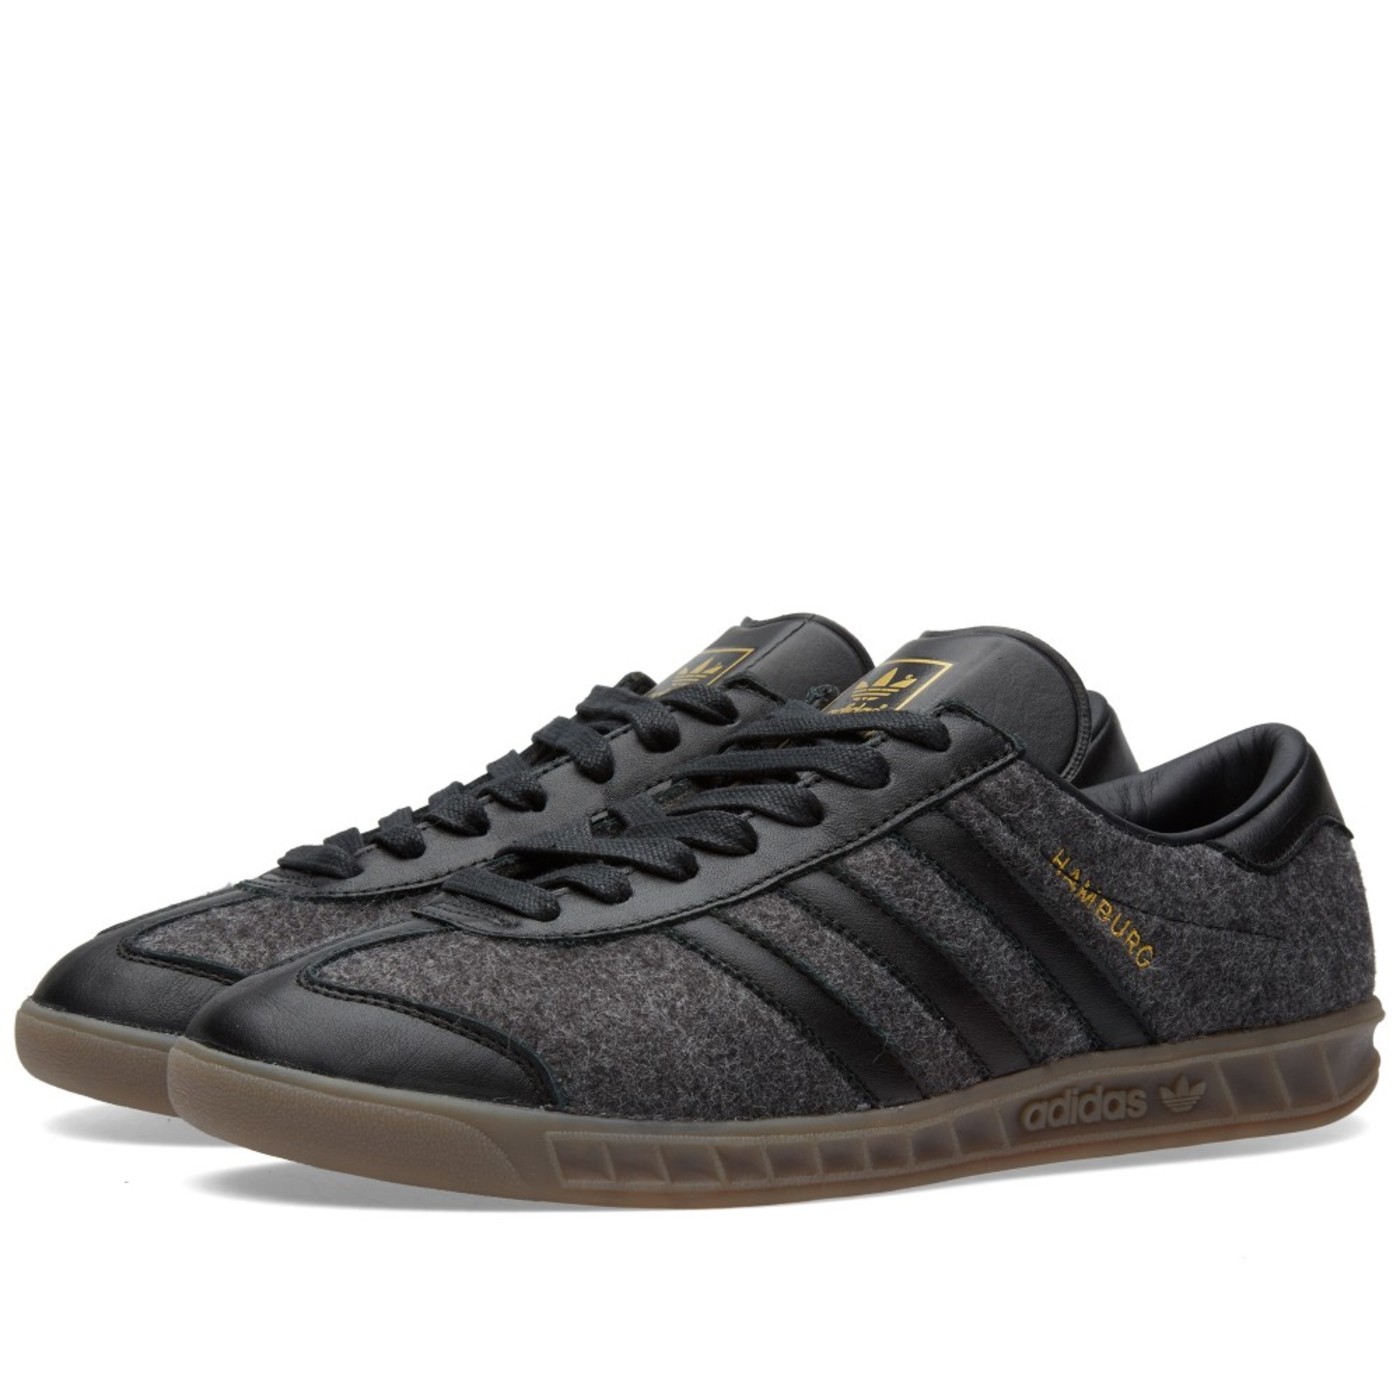 Could Talk About These Adidas Hamburgs 